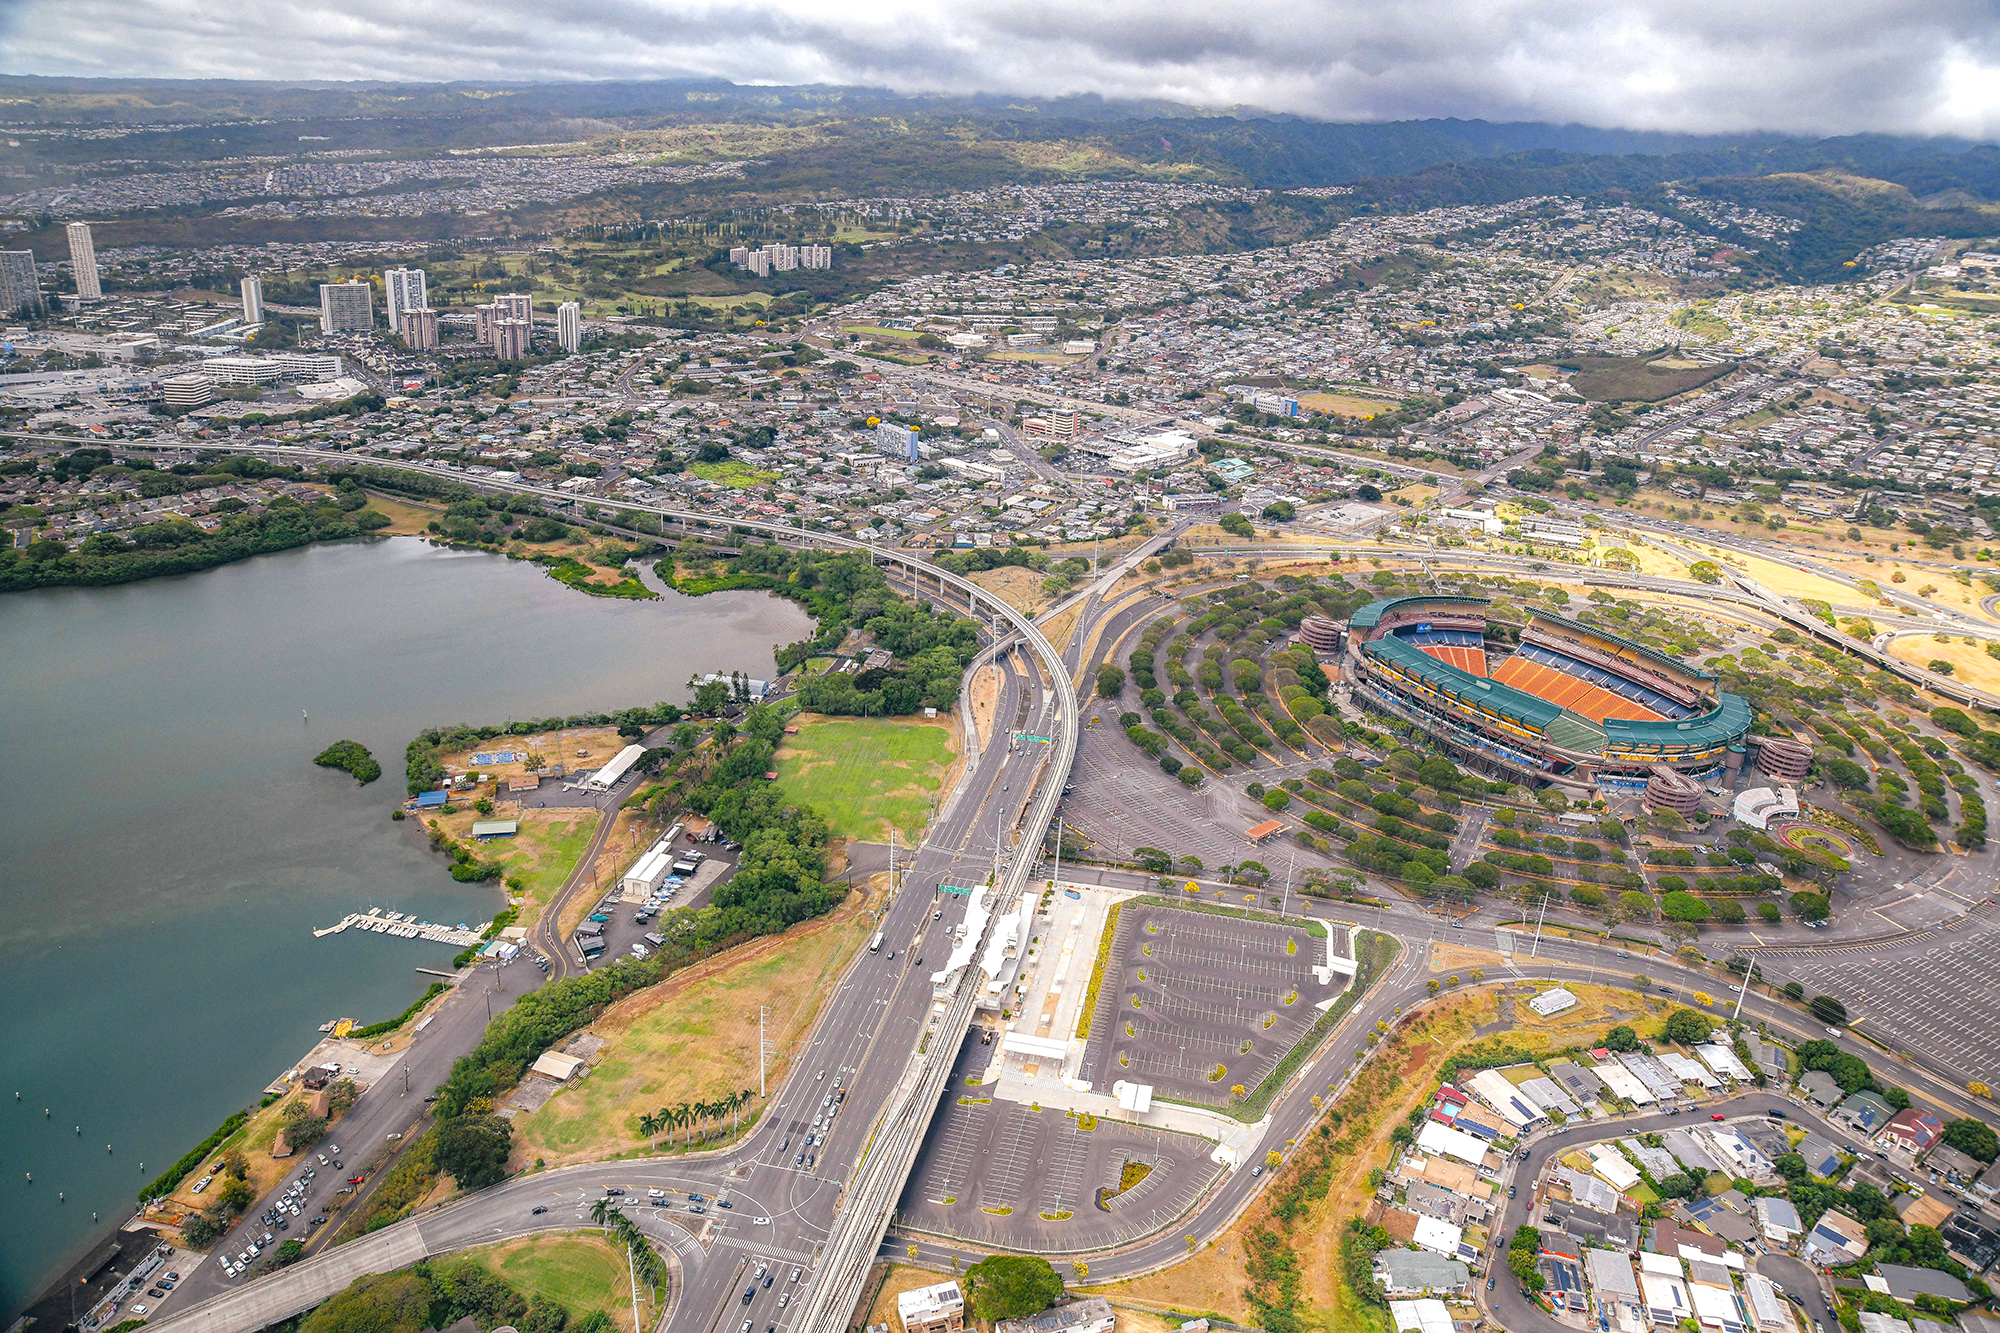 The Skyline route typically follows existing roadway rights of way. Shown here is the Halawa/Aloha Stadium. (Image courtesy of HART)